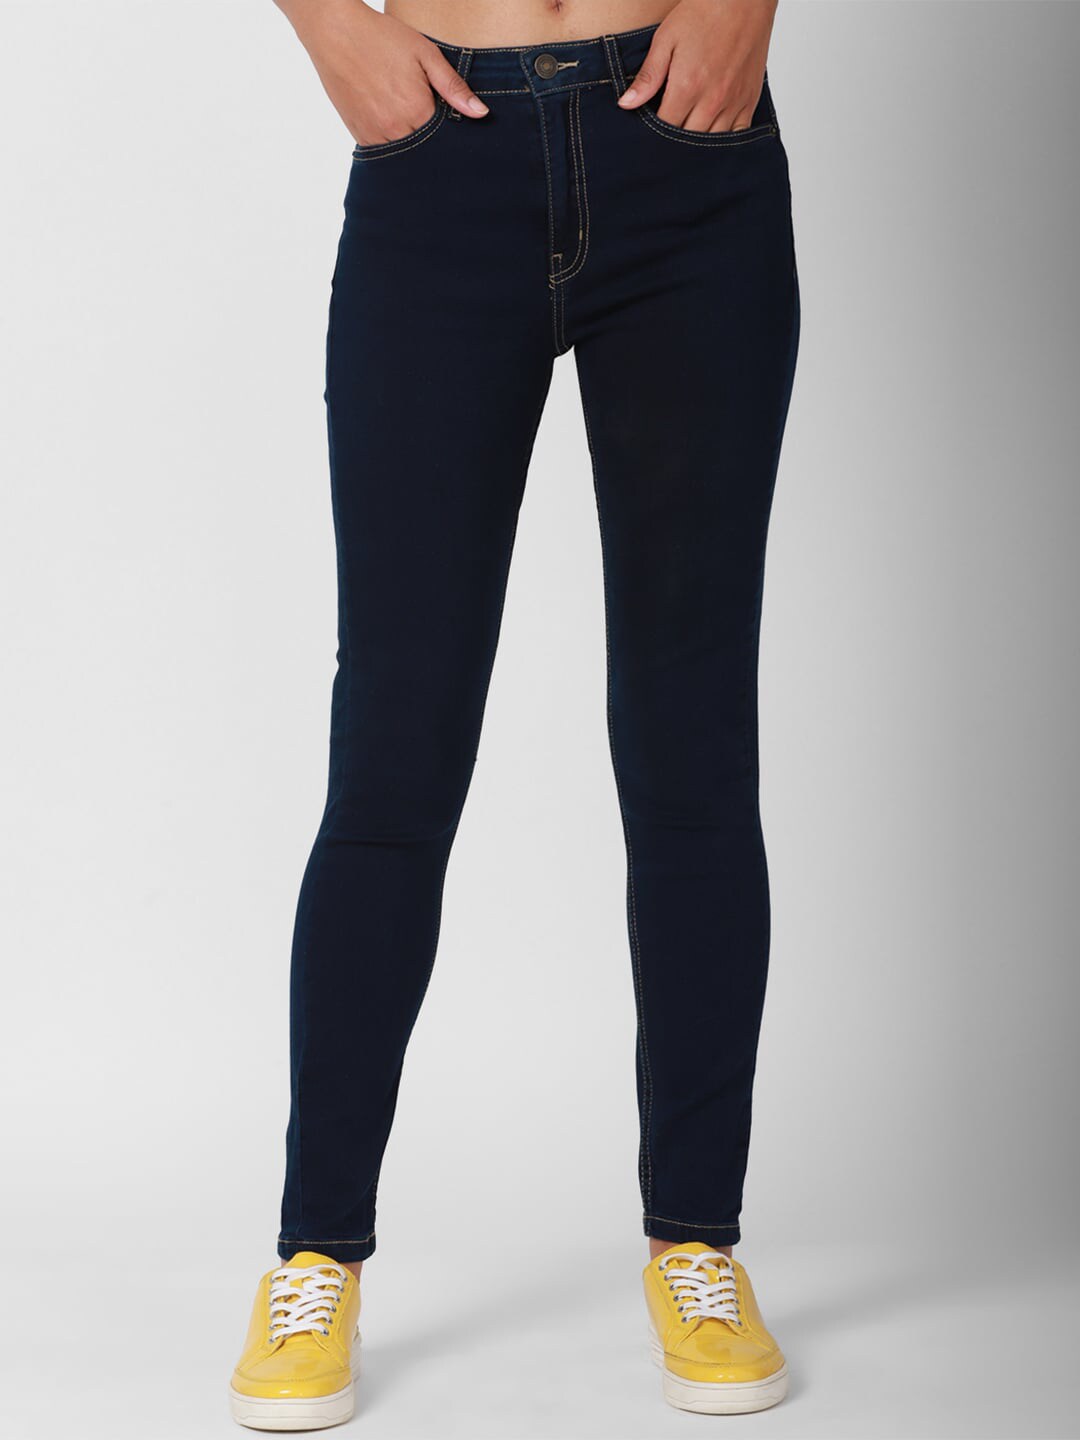 FOREVER 21 Women Navy Blue Slim Fit Jeans Price in India